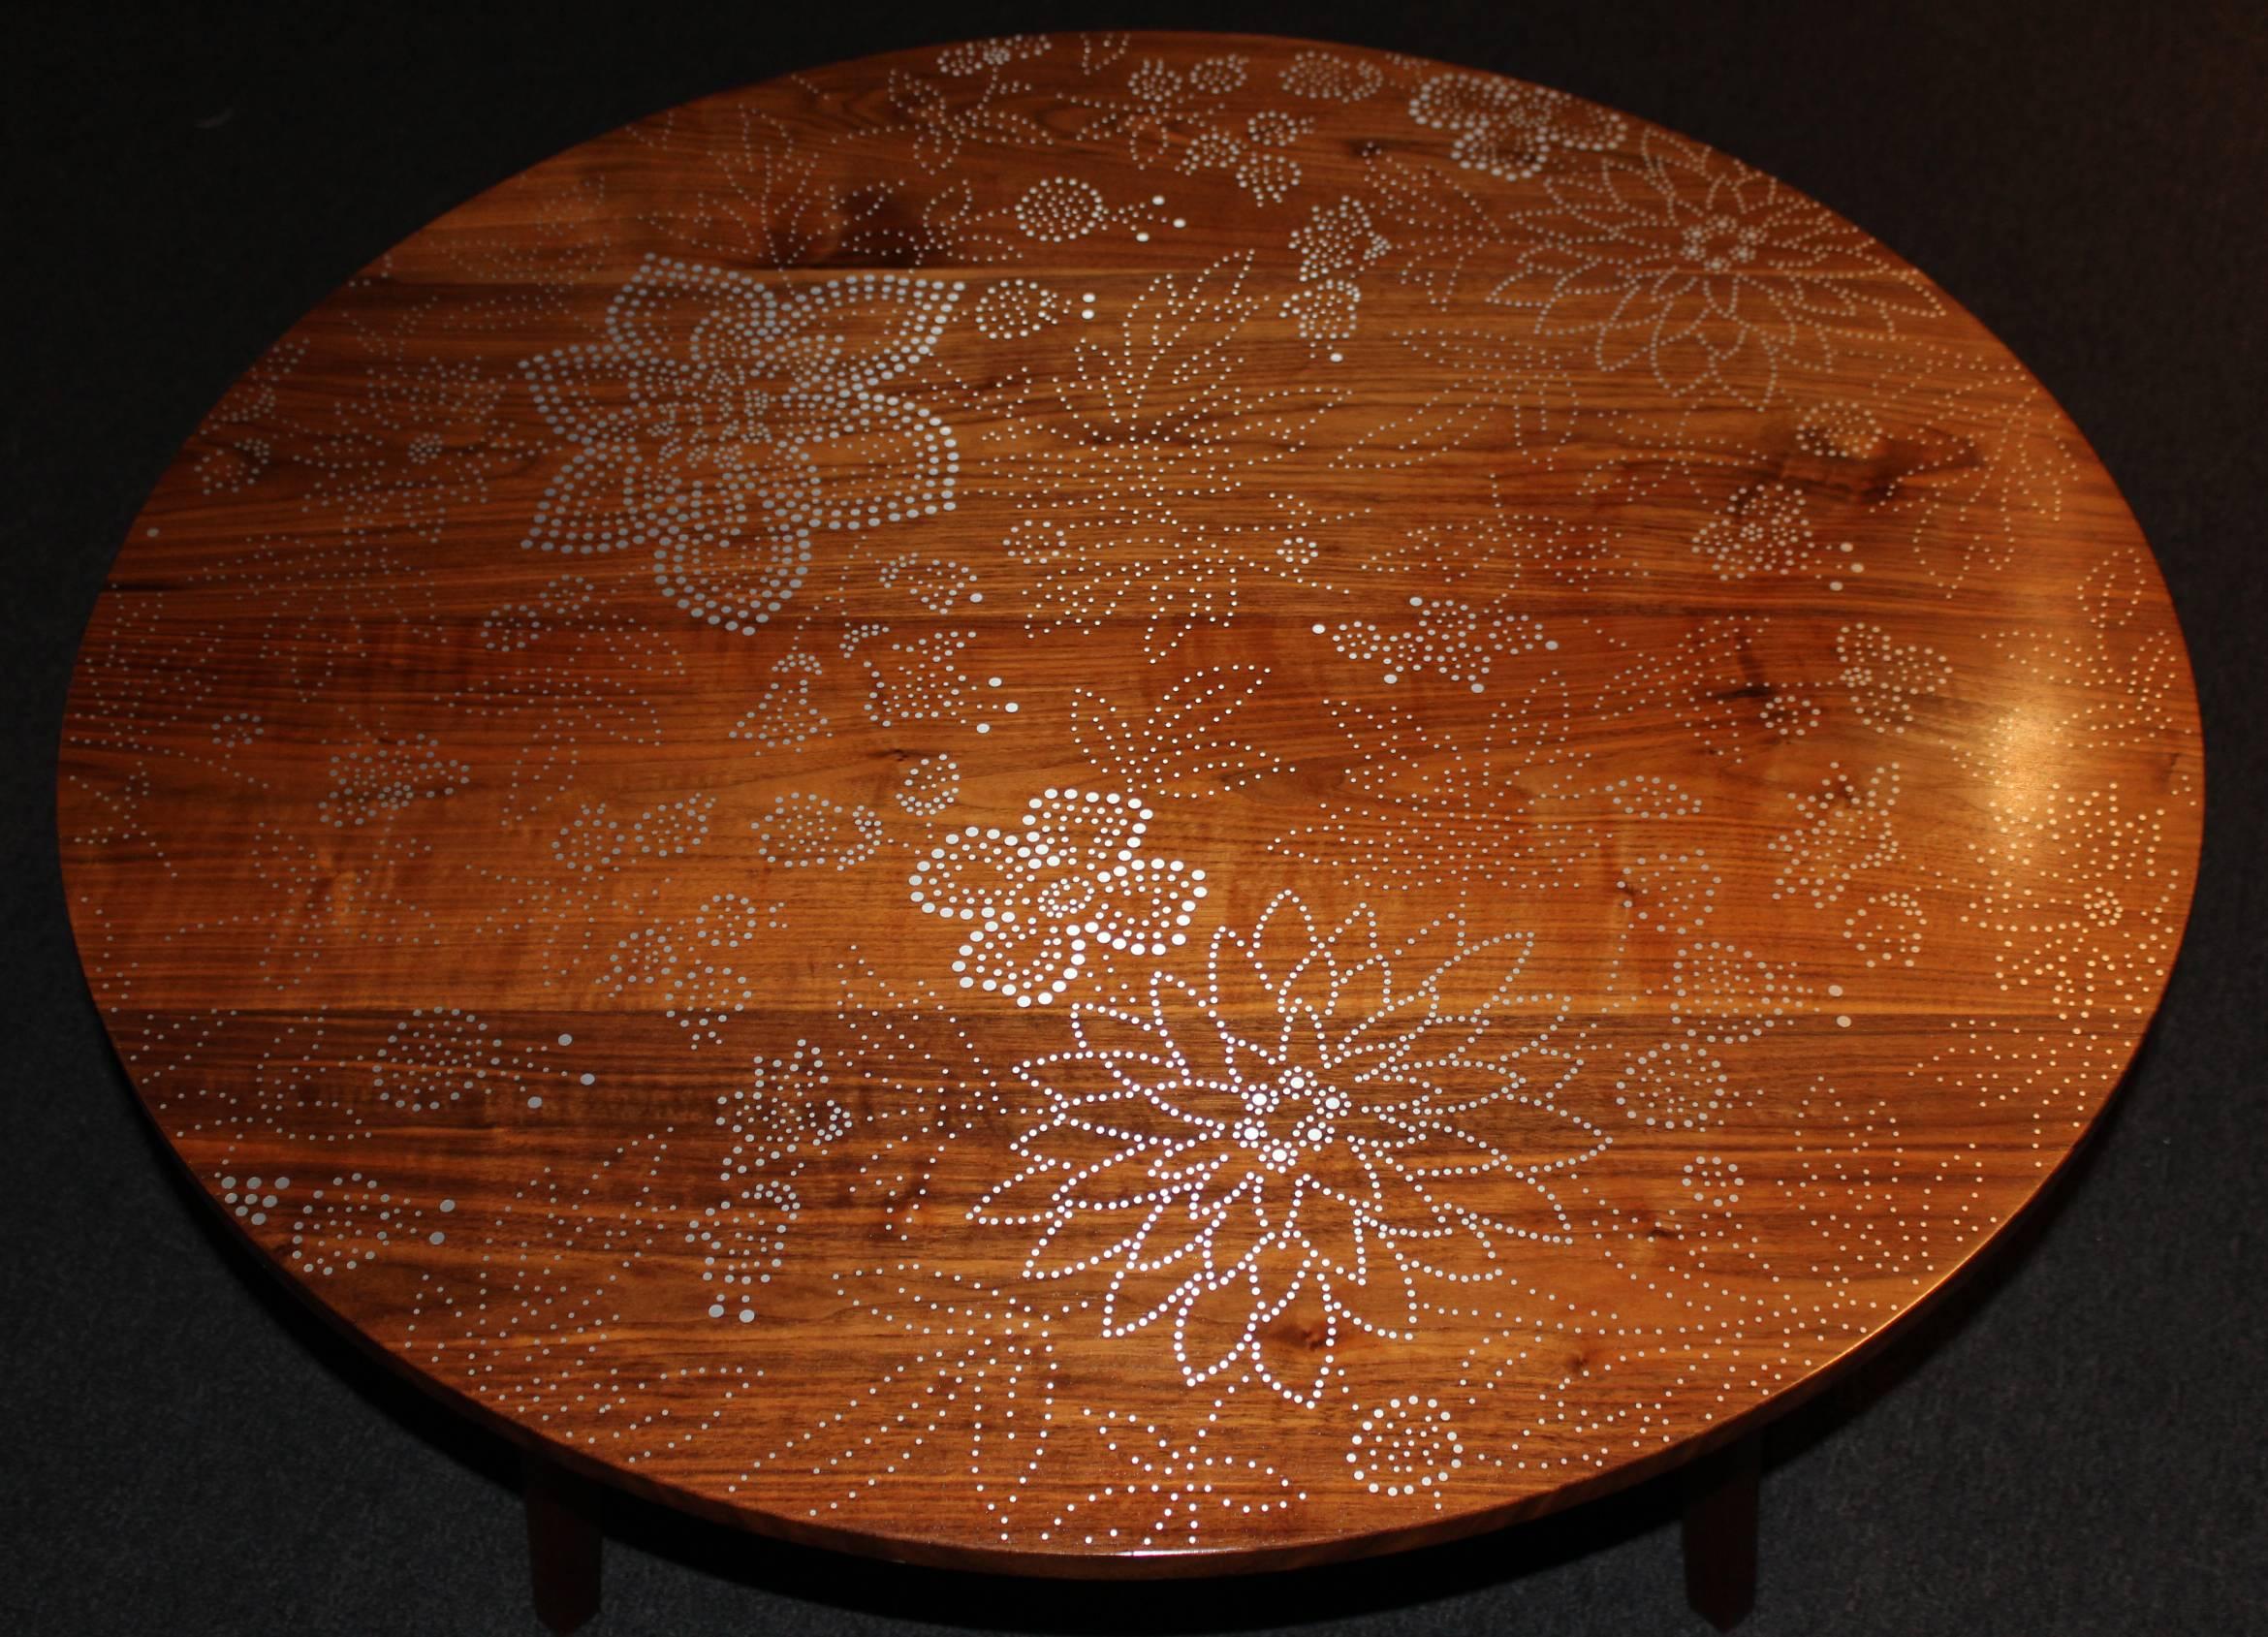 A fine custom modernist low round nail table in bleached walnut and baked maple and a floral aluminum nail pattern, handcrafted by Peter Sandback. Sandback has gained a national reputation for his intricate pattern work of inlaid nails set into